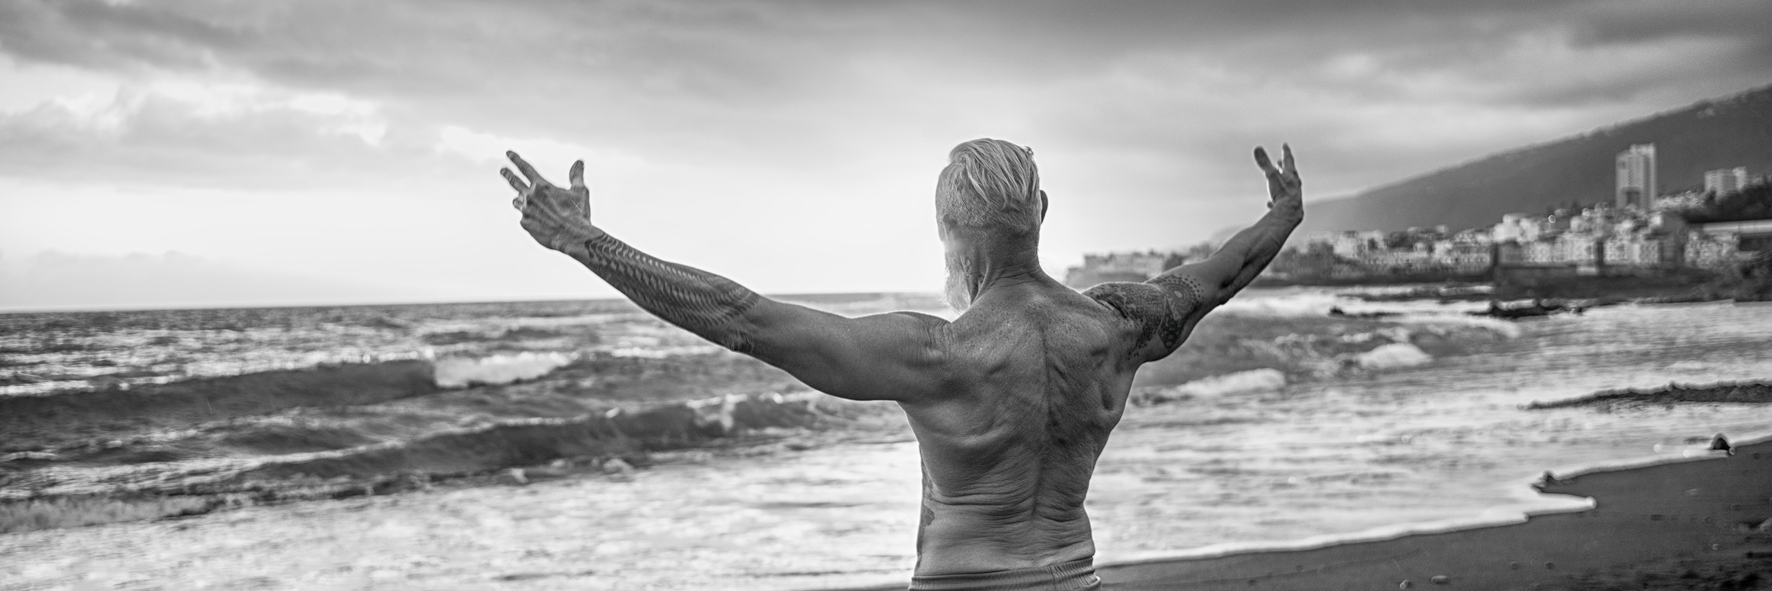 Back training - Image of senior man showing his muscular fit body with tattoos on the beach.